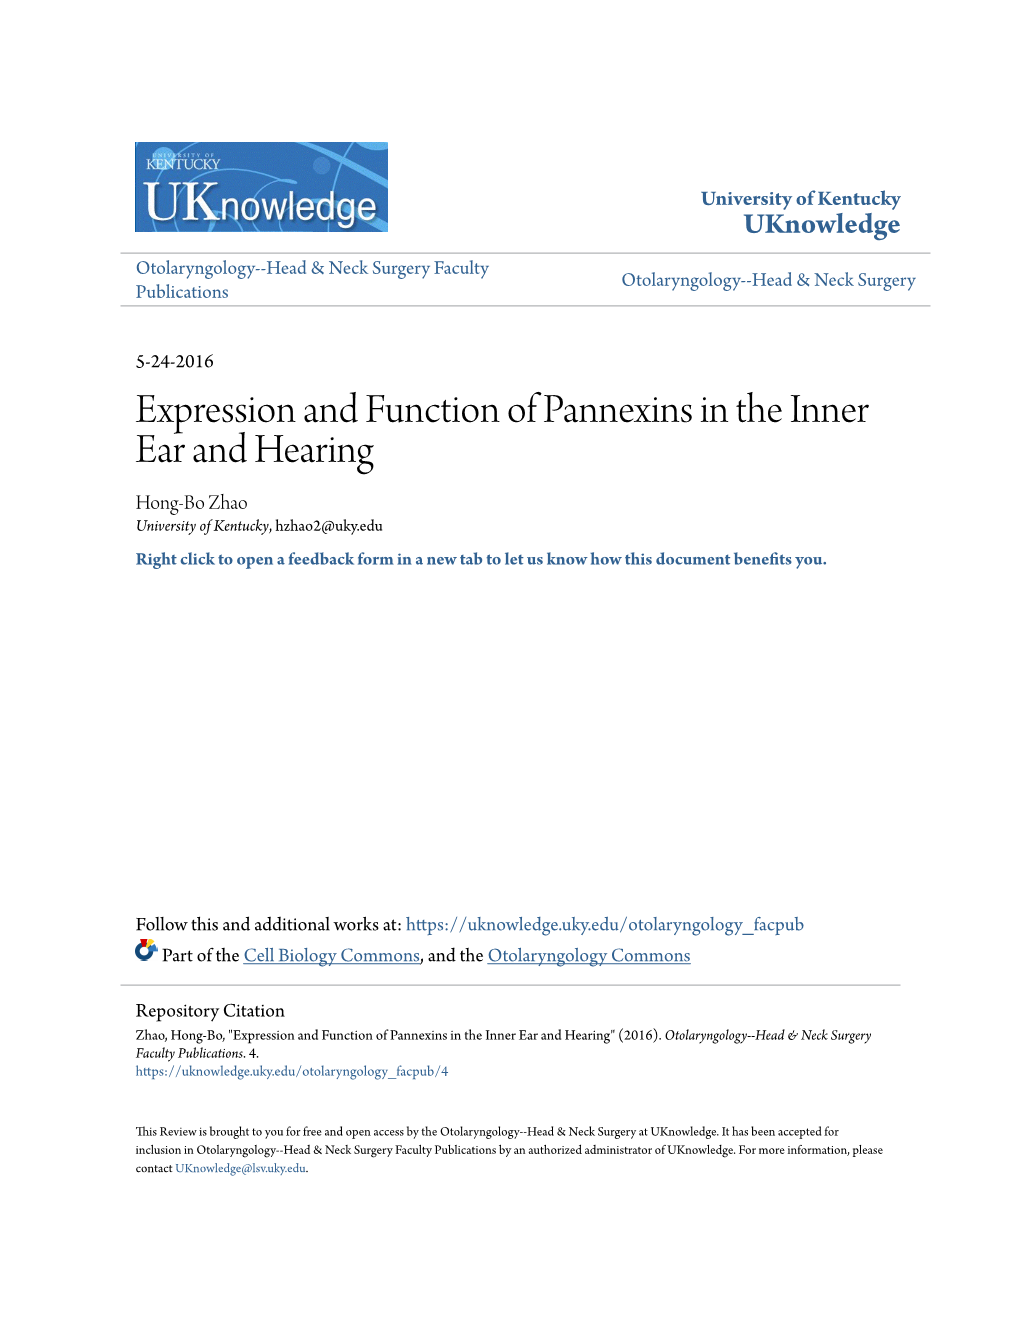 Expression and Function of Pannexins in the Inner Ear and Hearing